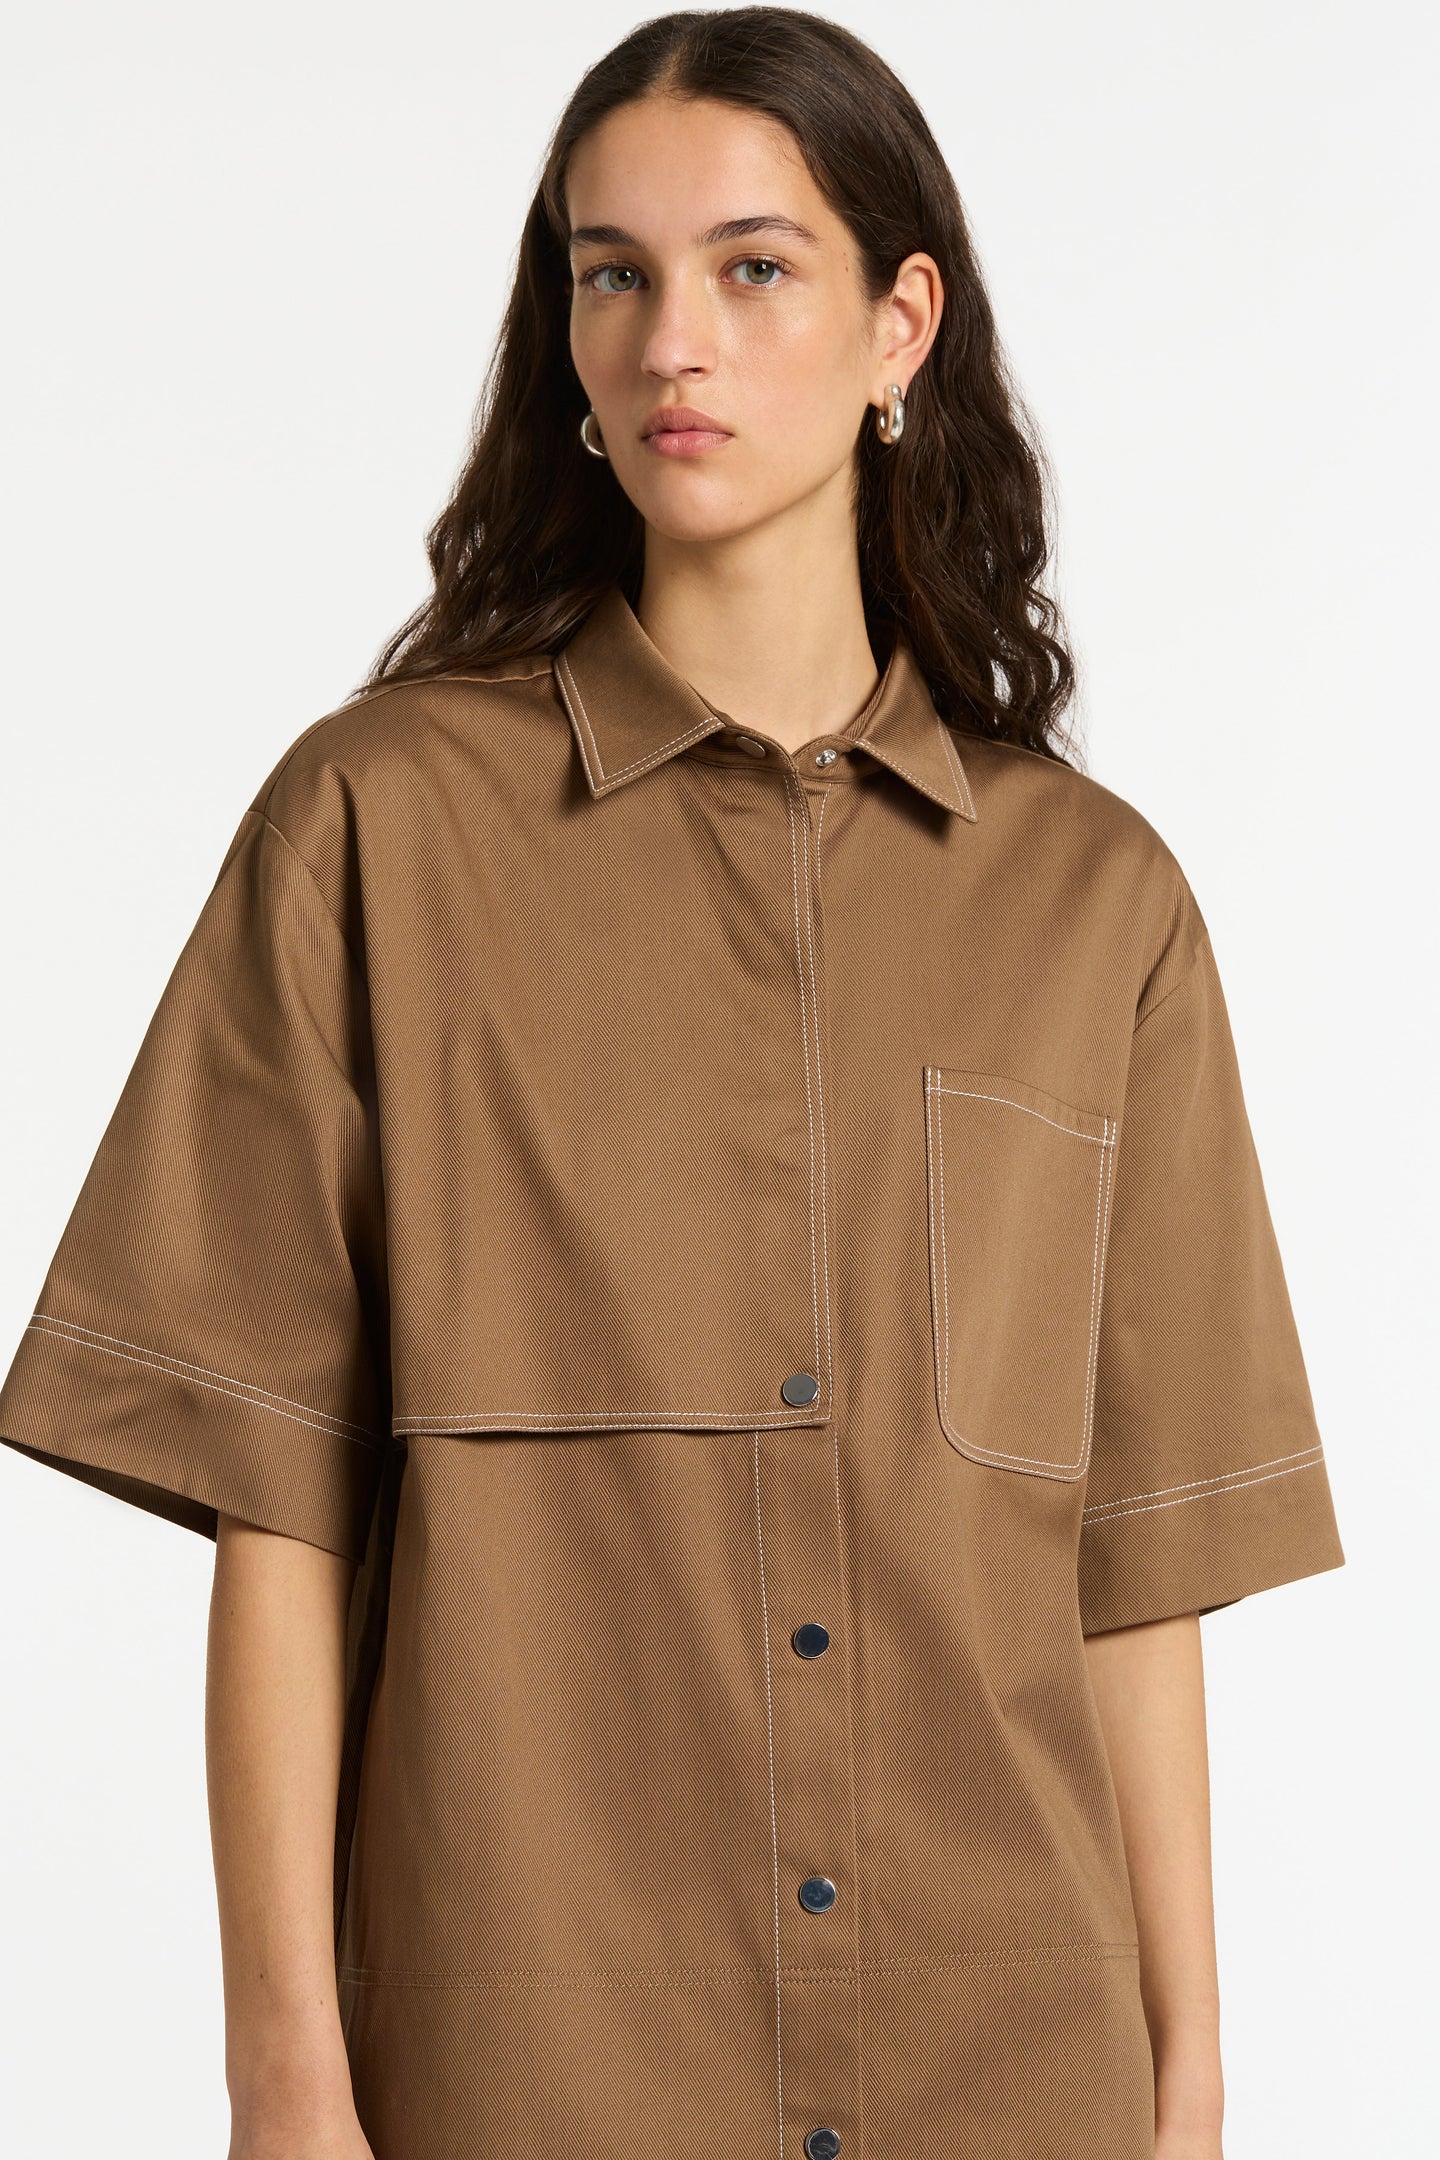 SIR the label Bourdelle Utility Shirt Biscuit